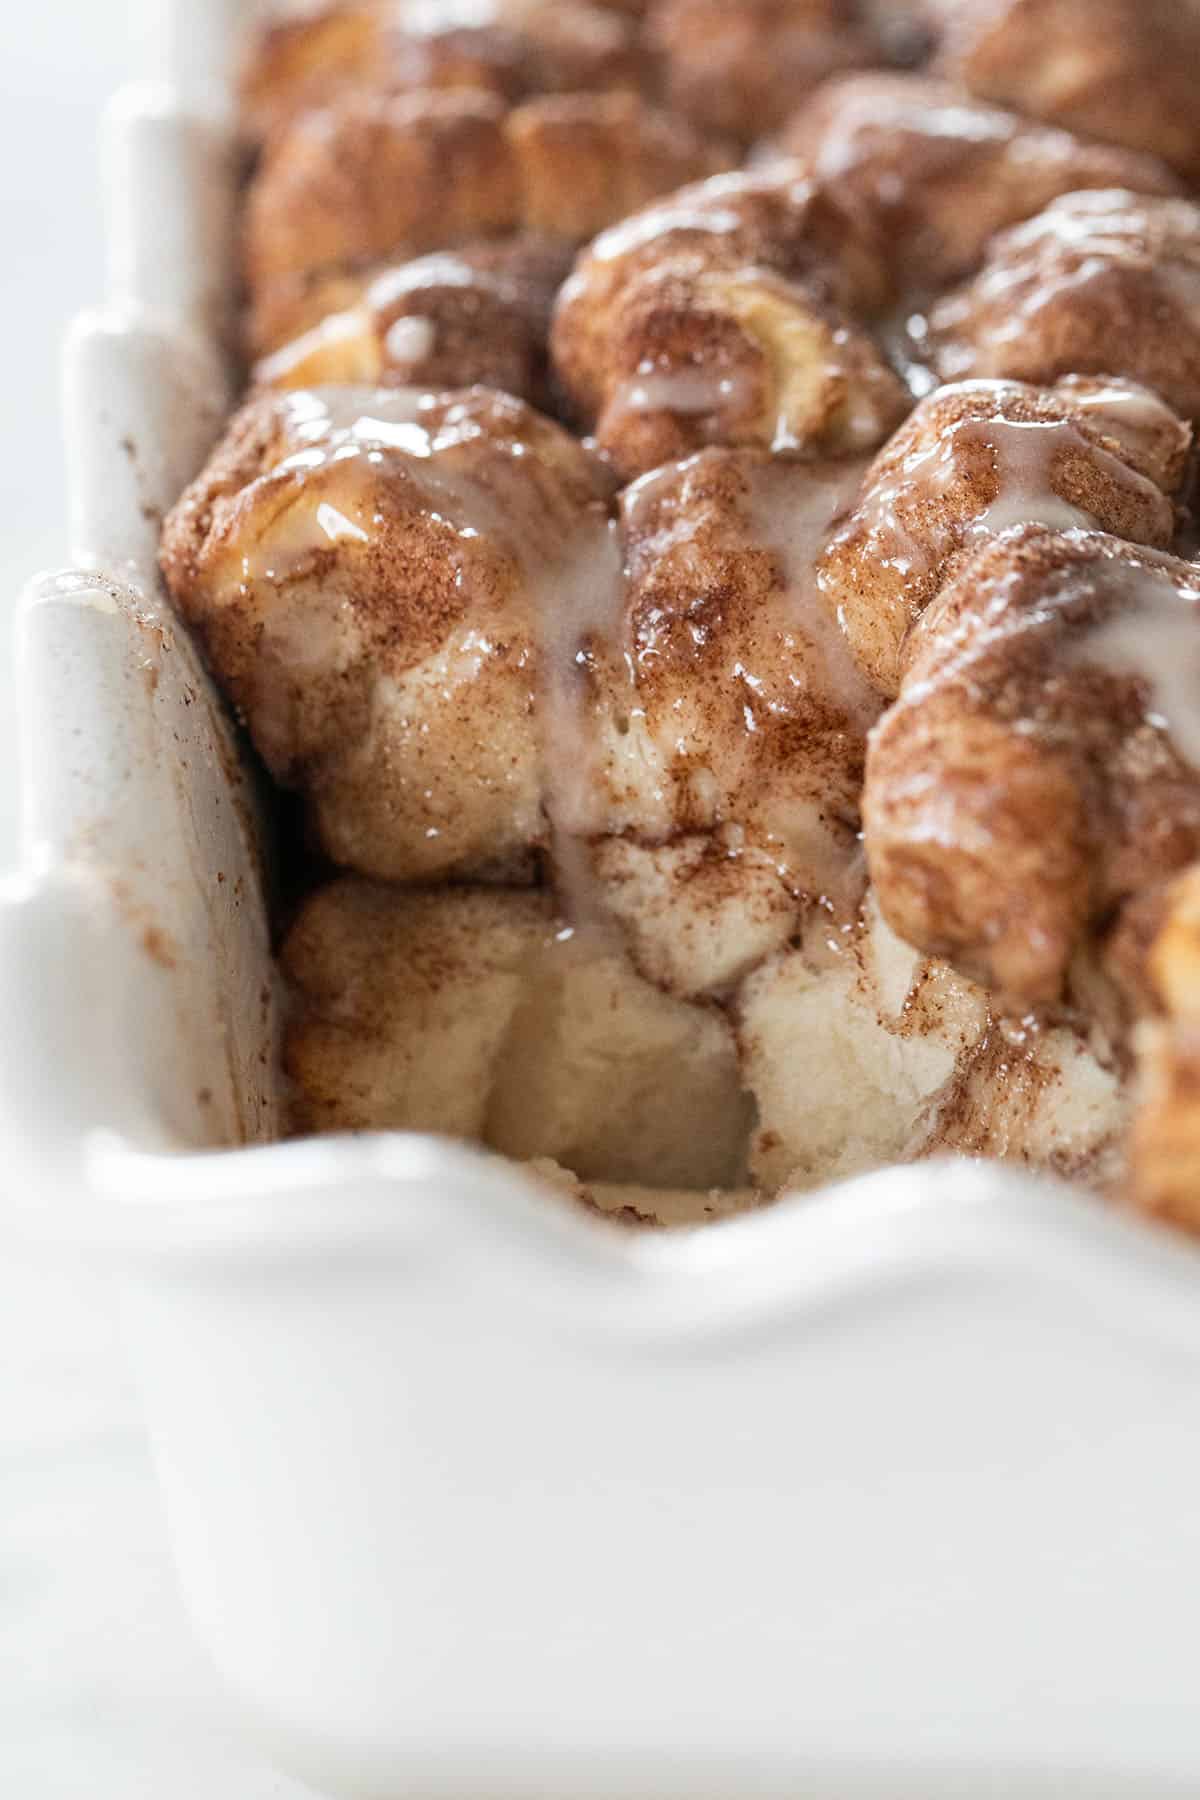 how to make monkey bread recipe - cinnamon sugar, bundt pan, cooking time, preheated oven, brown sugar, biscuit pieces, pull apart bread